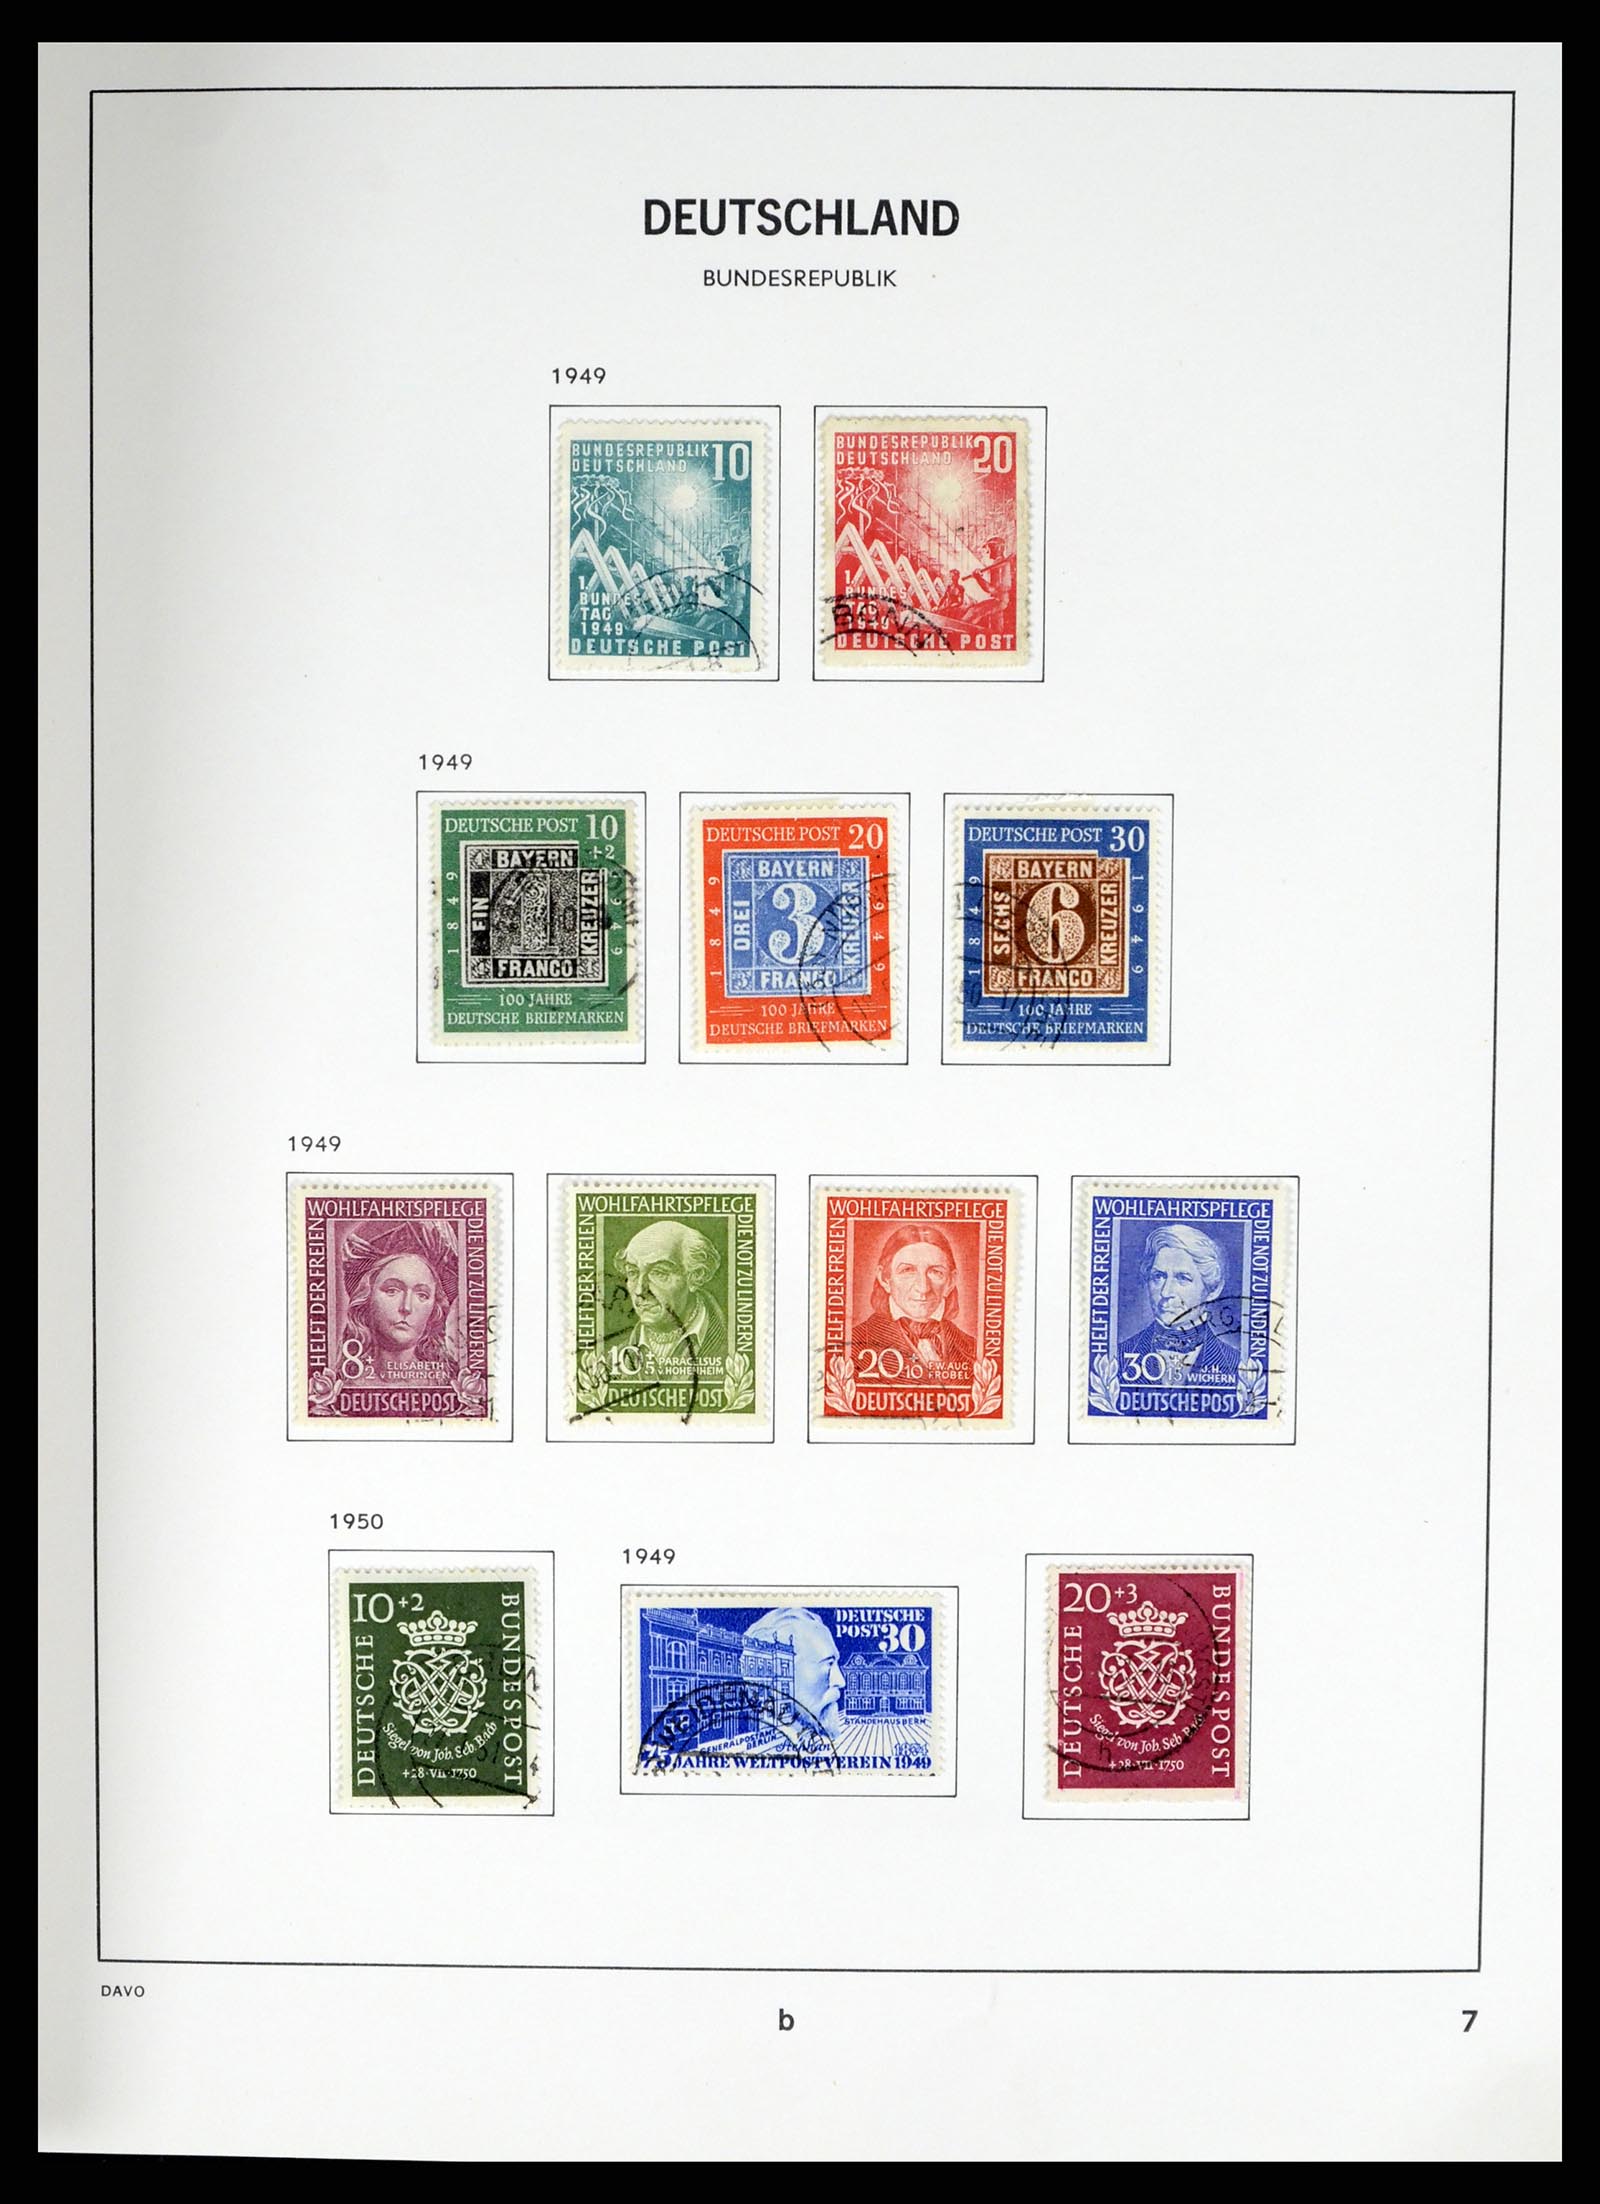 37330 029 - Stamp collection 37330 Germany 1946-1969.